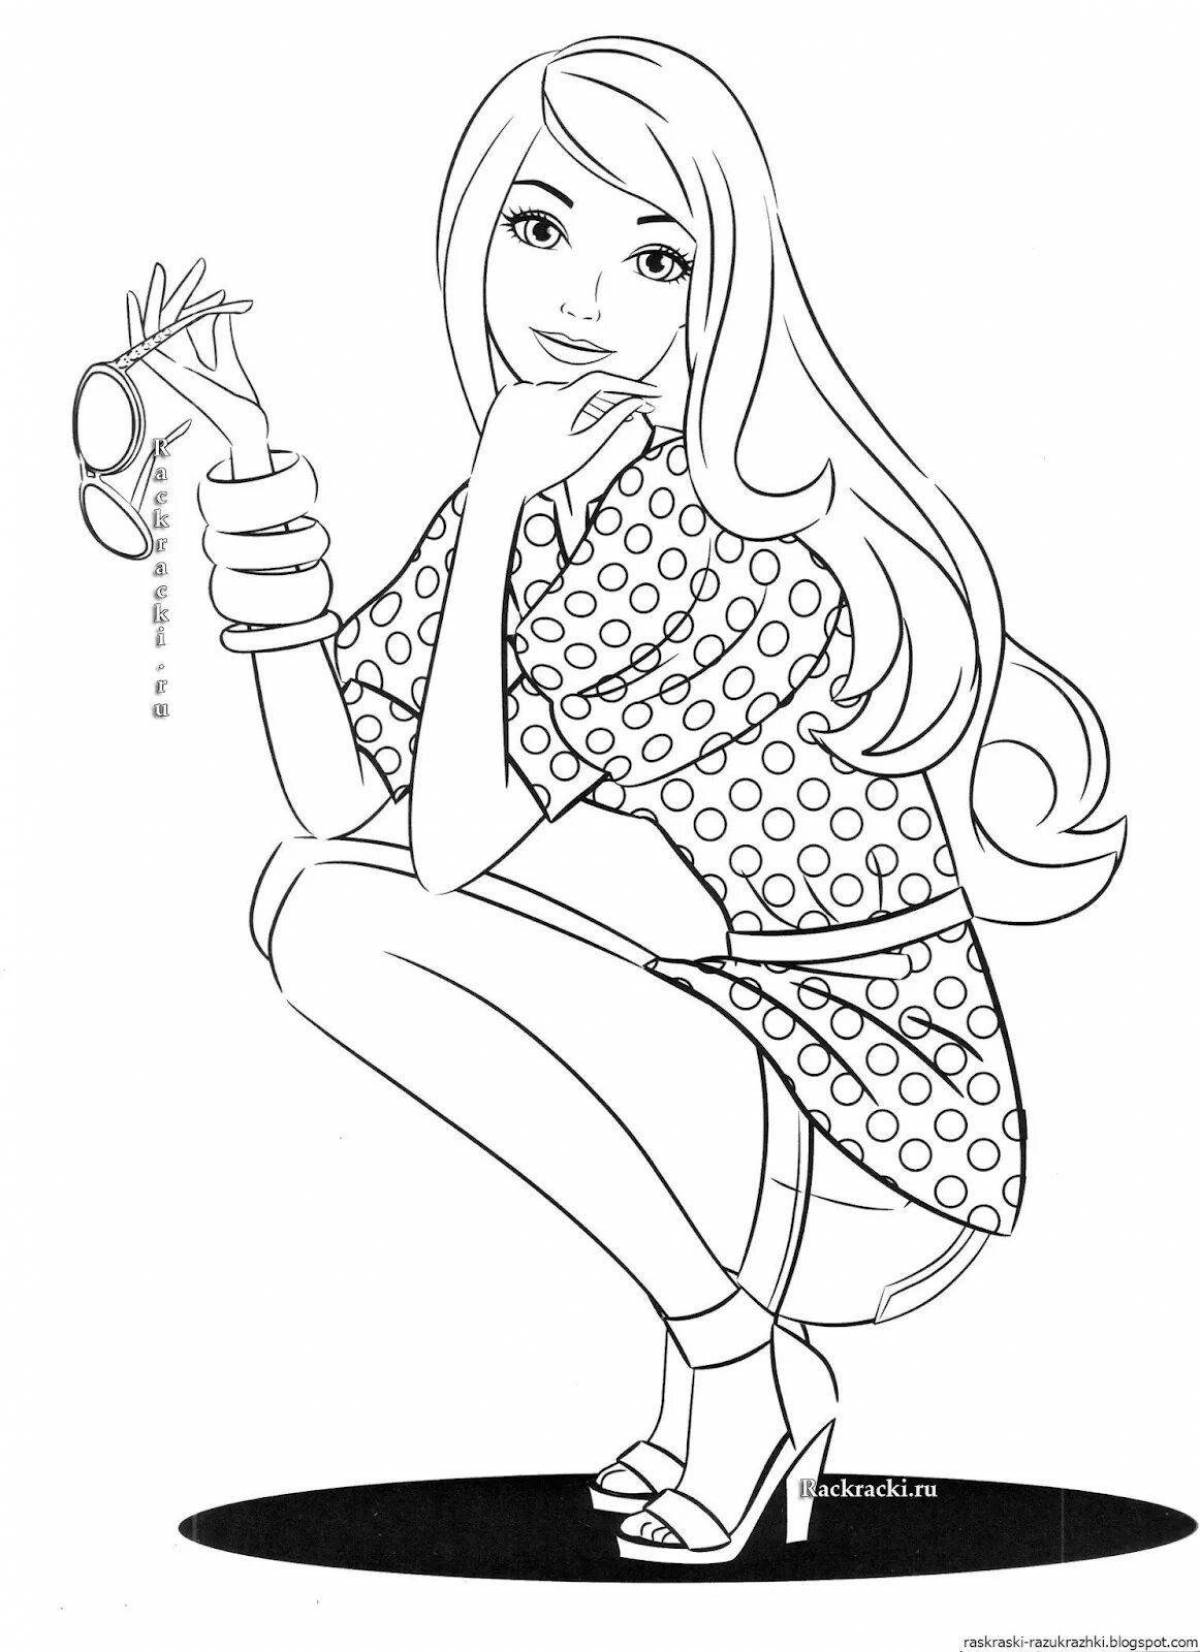 Fun coloring page 11 for girls